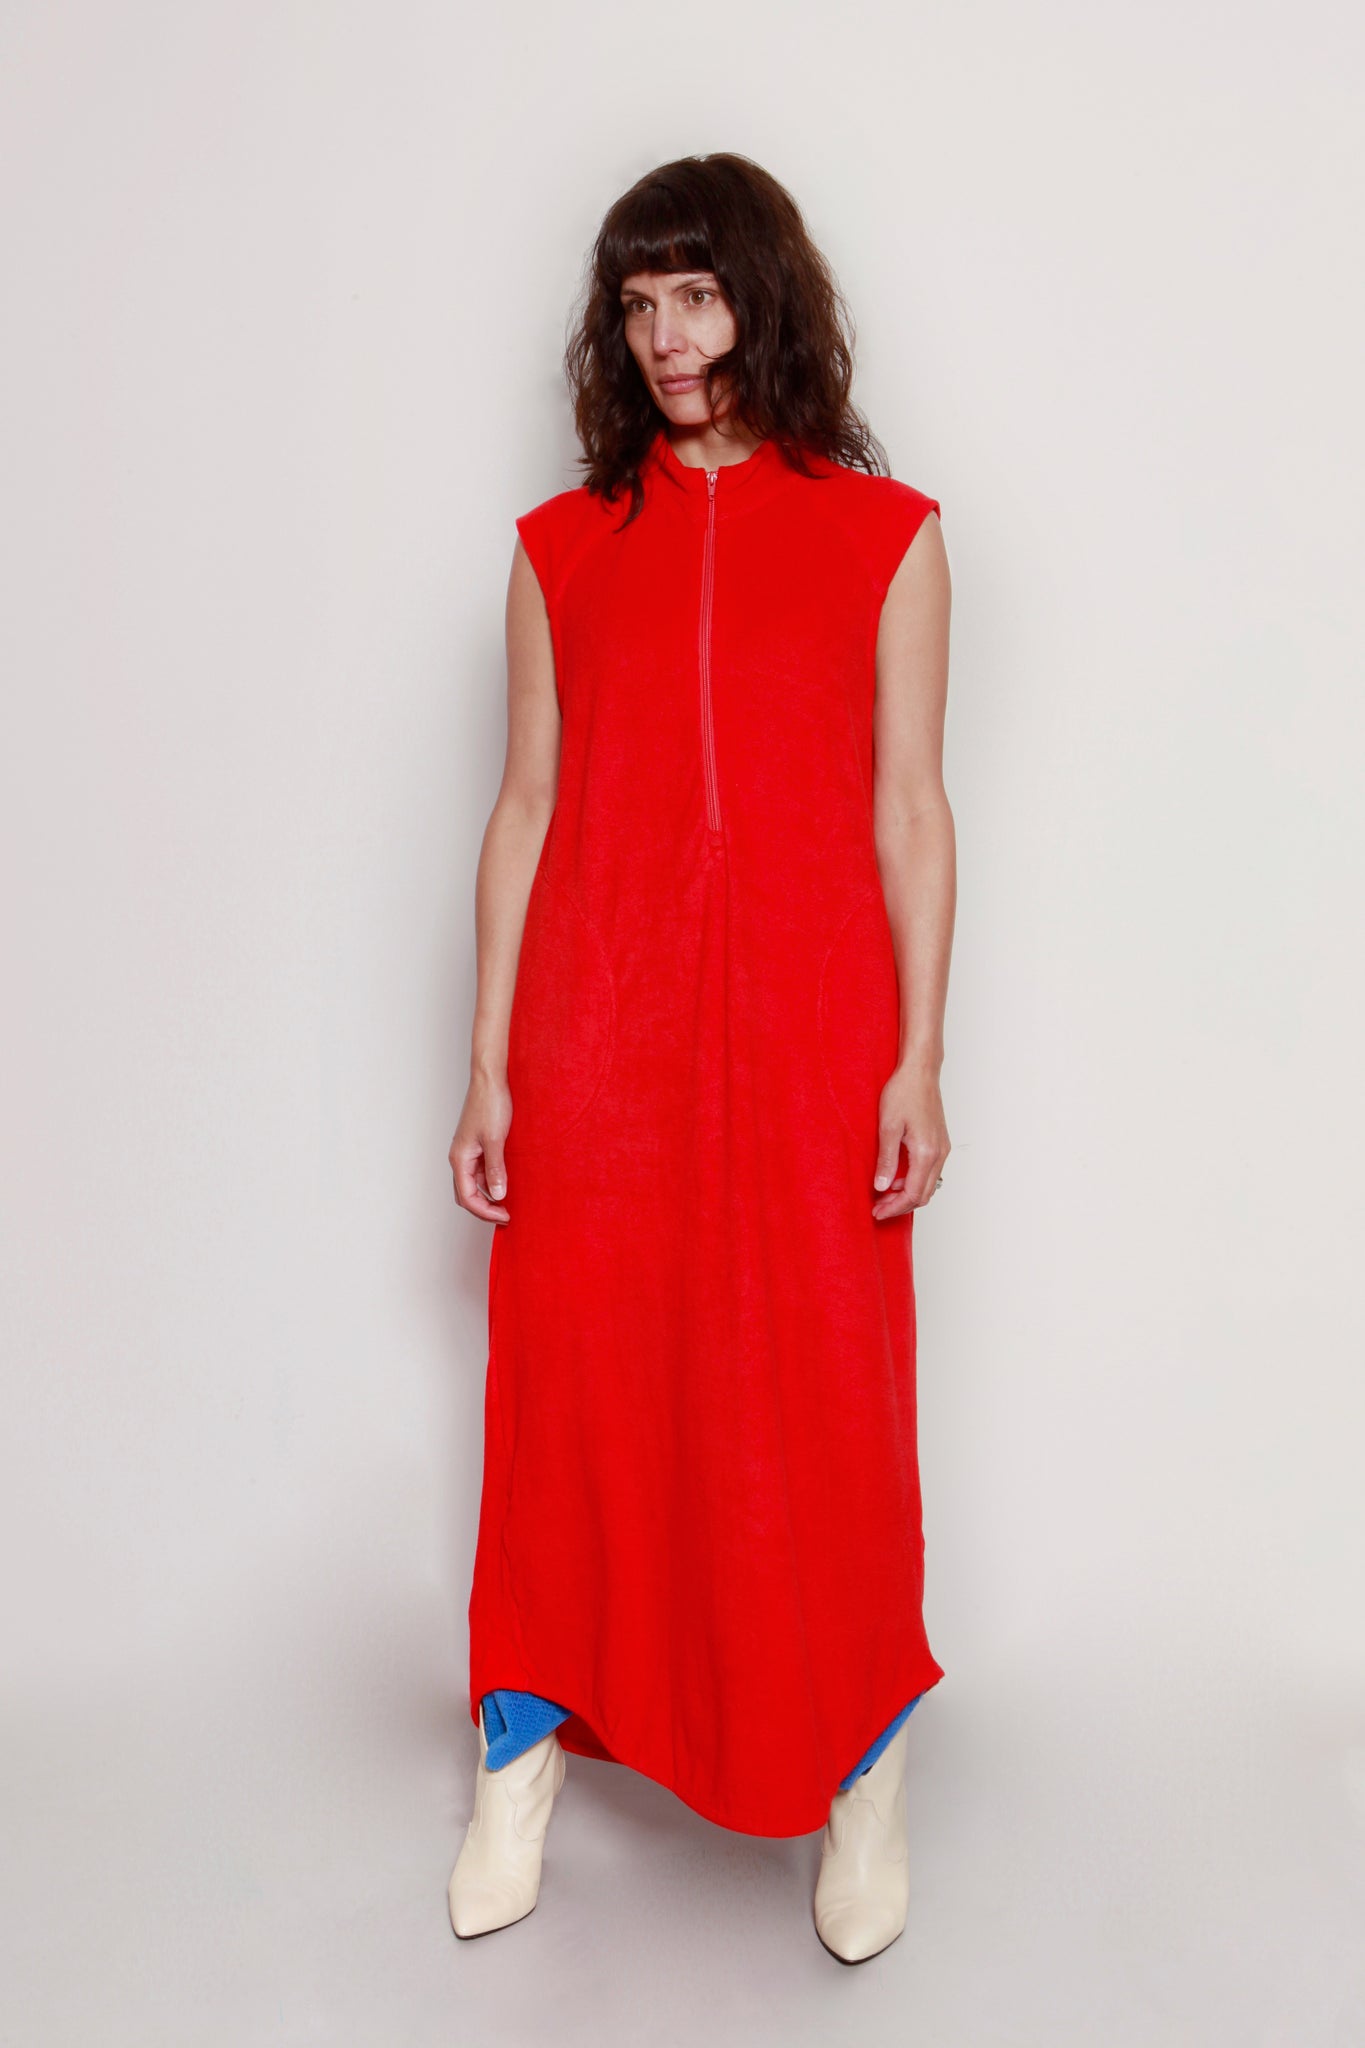 Kaftan Liberall. Style: Donnie - unisex, no sleeve, red. Photo by Eva Roefs.